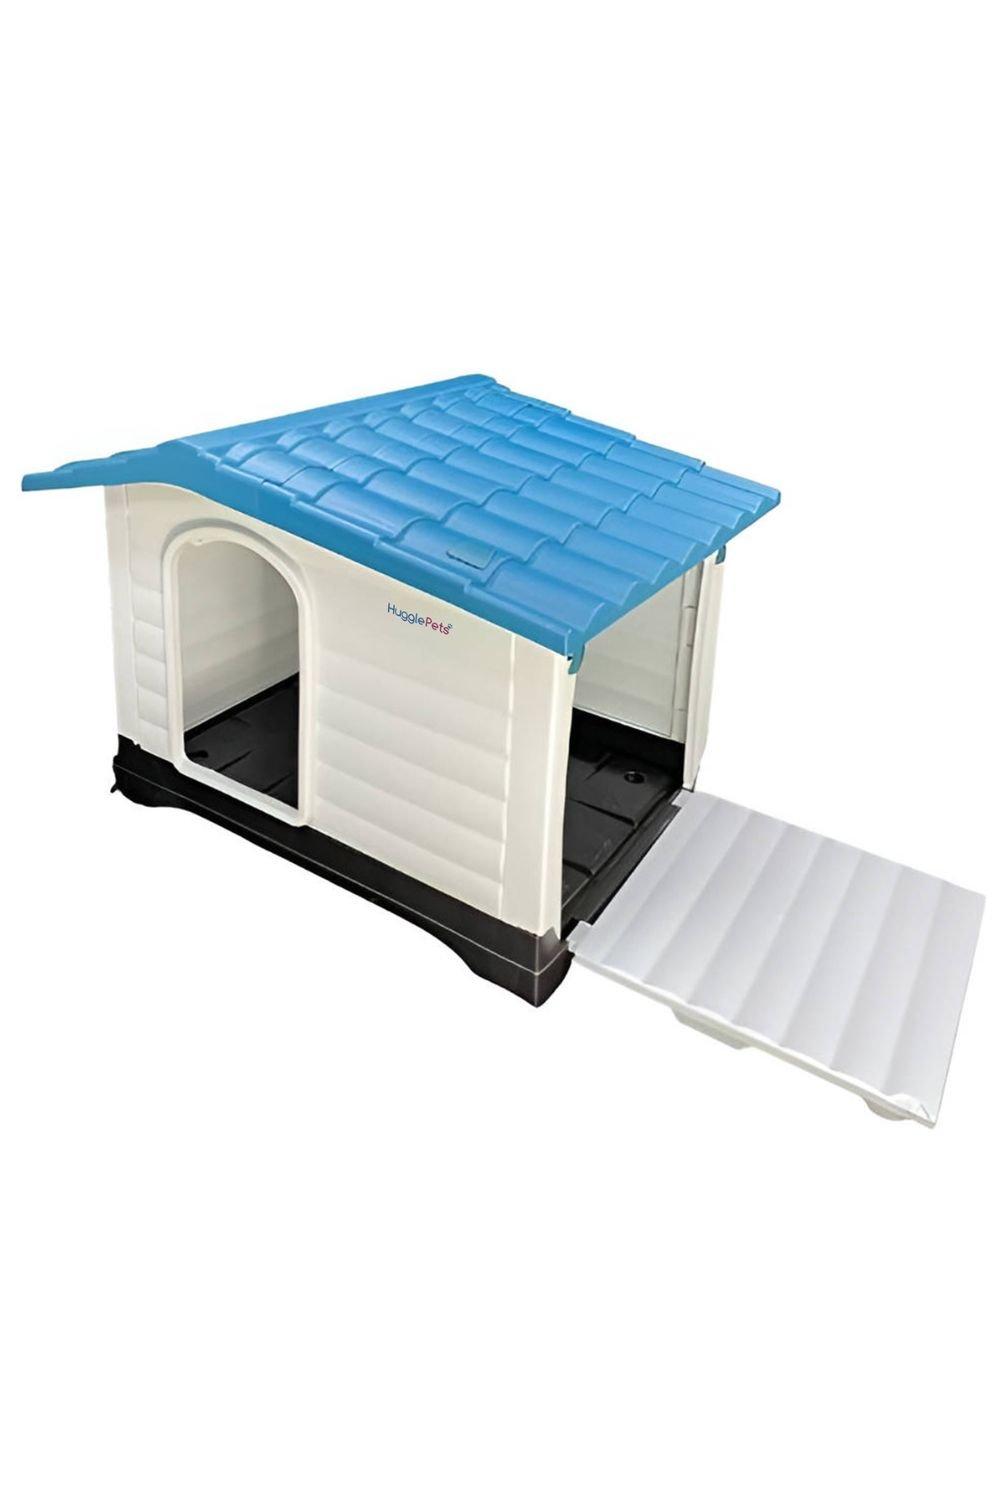 Plastic Dog Kennel with Base (424)